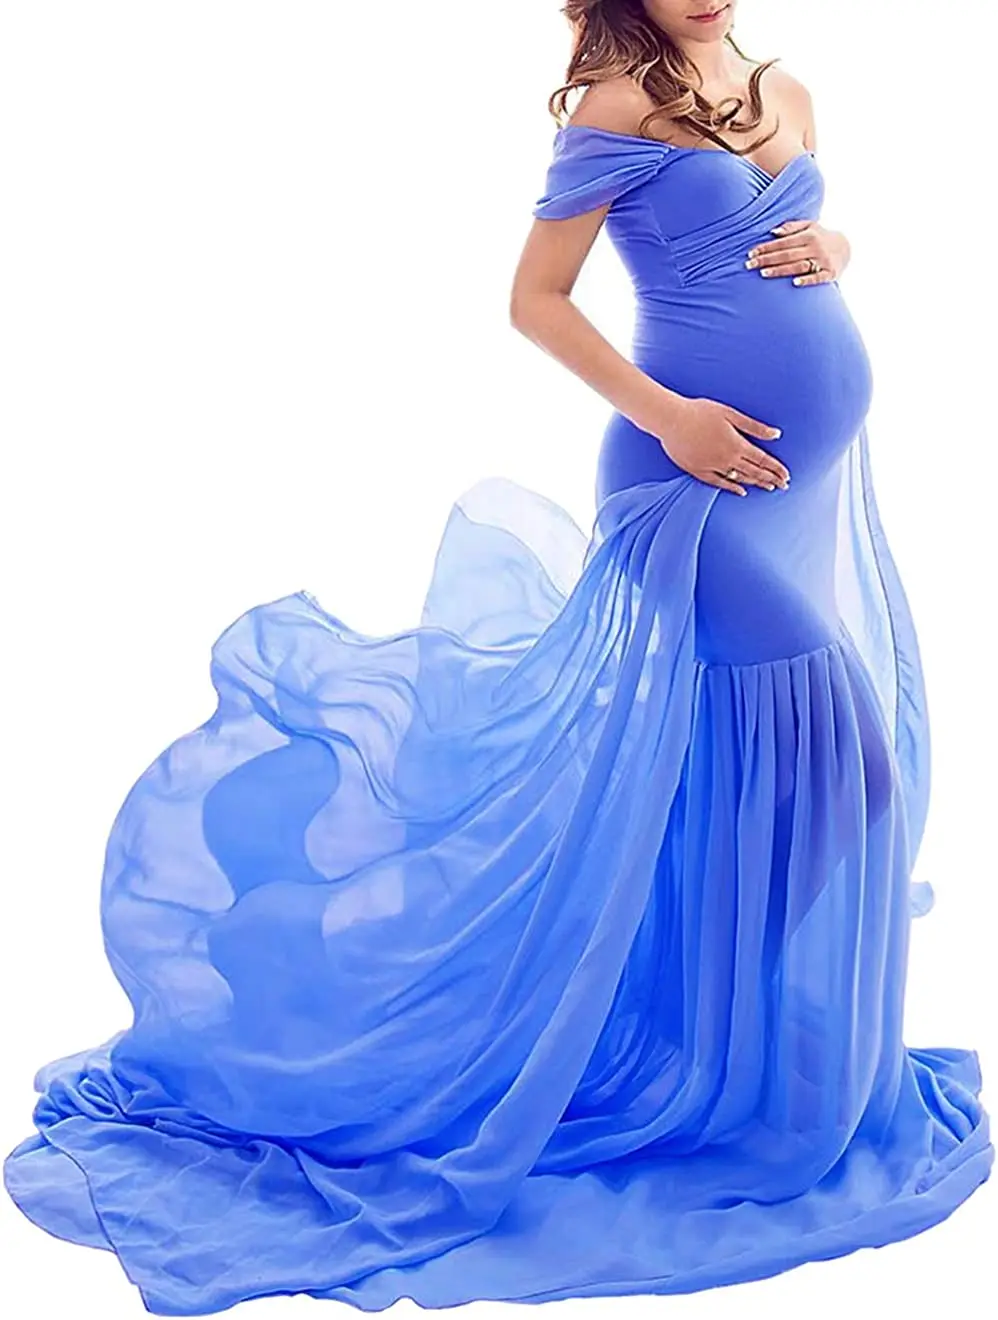 maternity-chiffon-mermaid-gown-off-shoulder-dropped-sleeve-fitted-photo-shoot-photography-dress